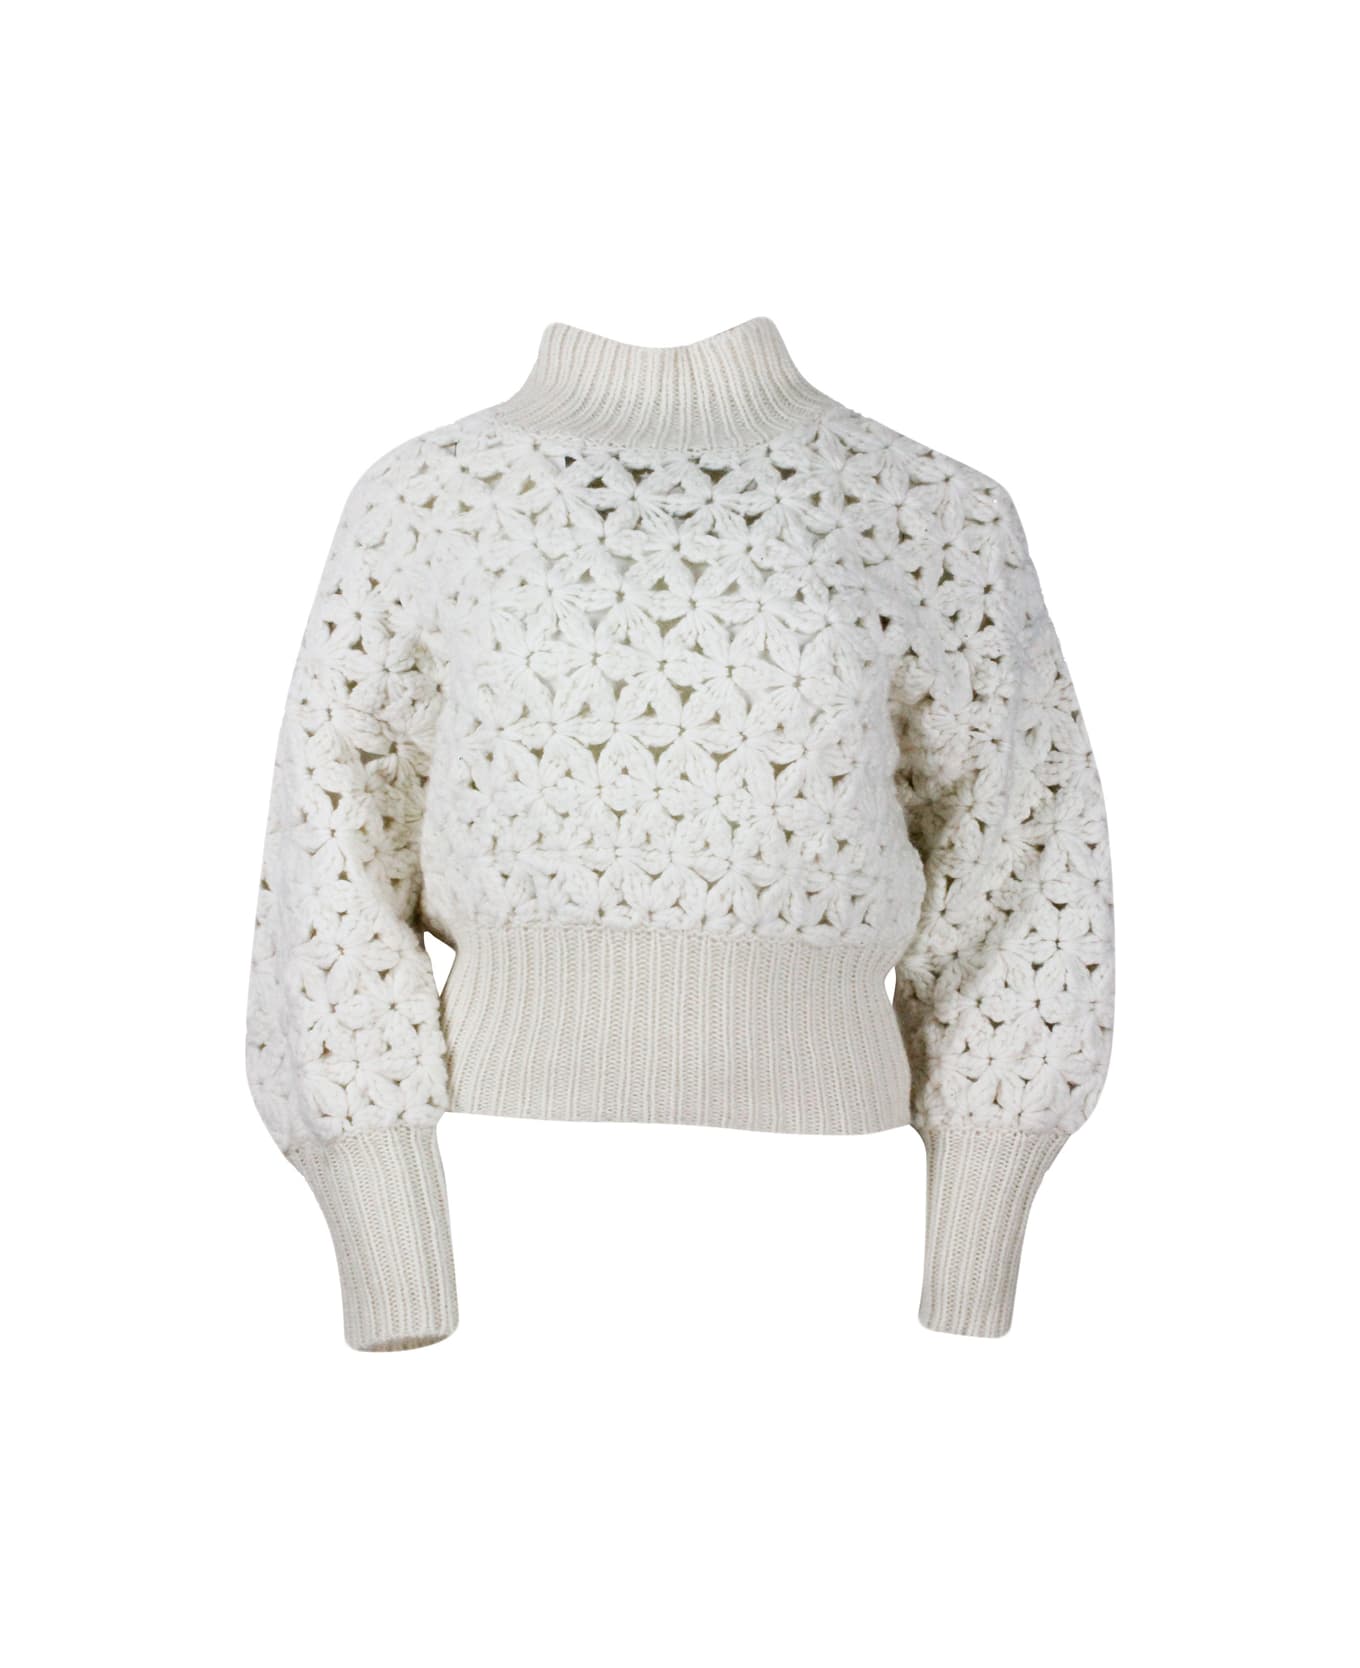 Fabiana Filippi Long-sleeved High-neck Sweater In Soft And Precious Wool, Silk And Cashmere With Flower Processing And Hand-made And Embellished With Micro-sequins - White ニットウェア